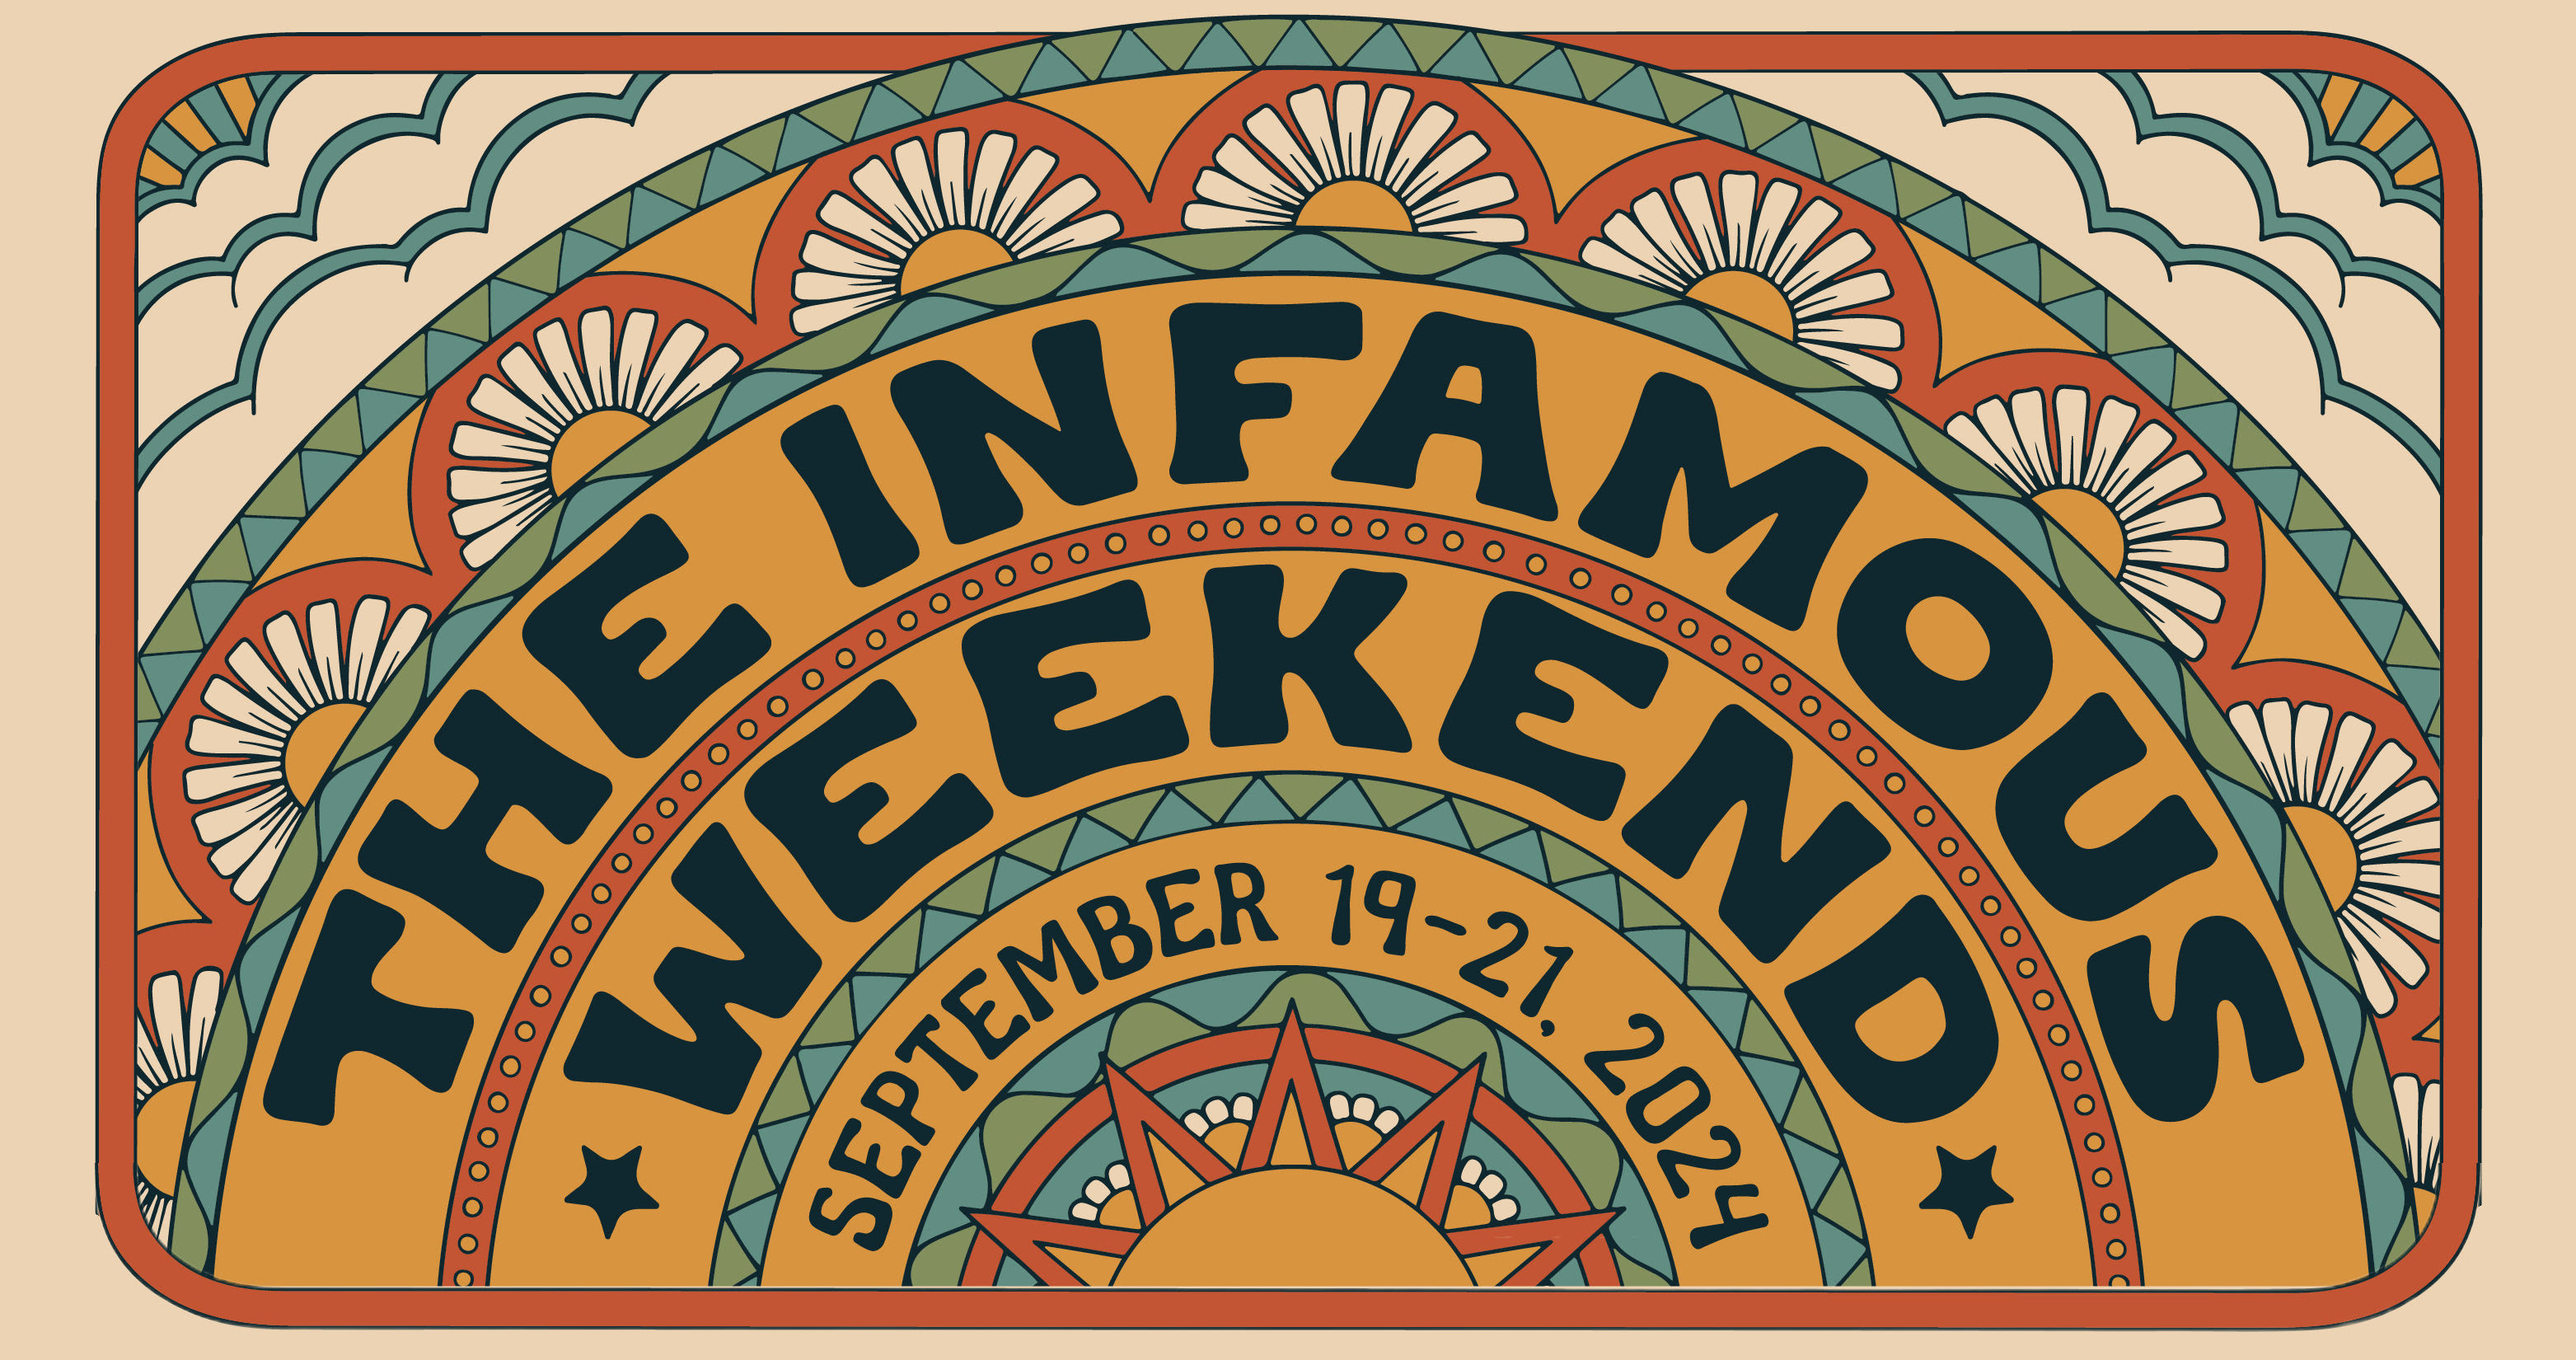 ‘The Infamous Weekend’ returns Sept. 19-21 at Pop’s Farm in Martinsville, Va.